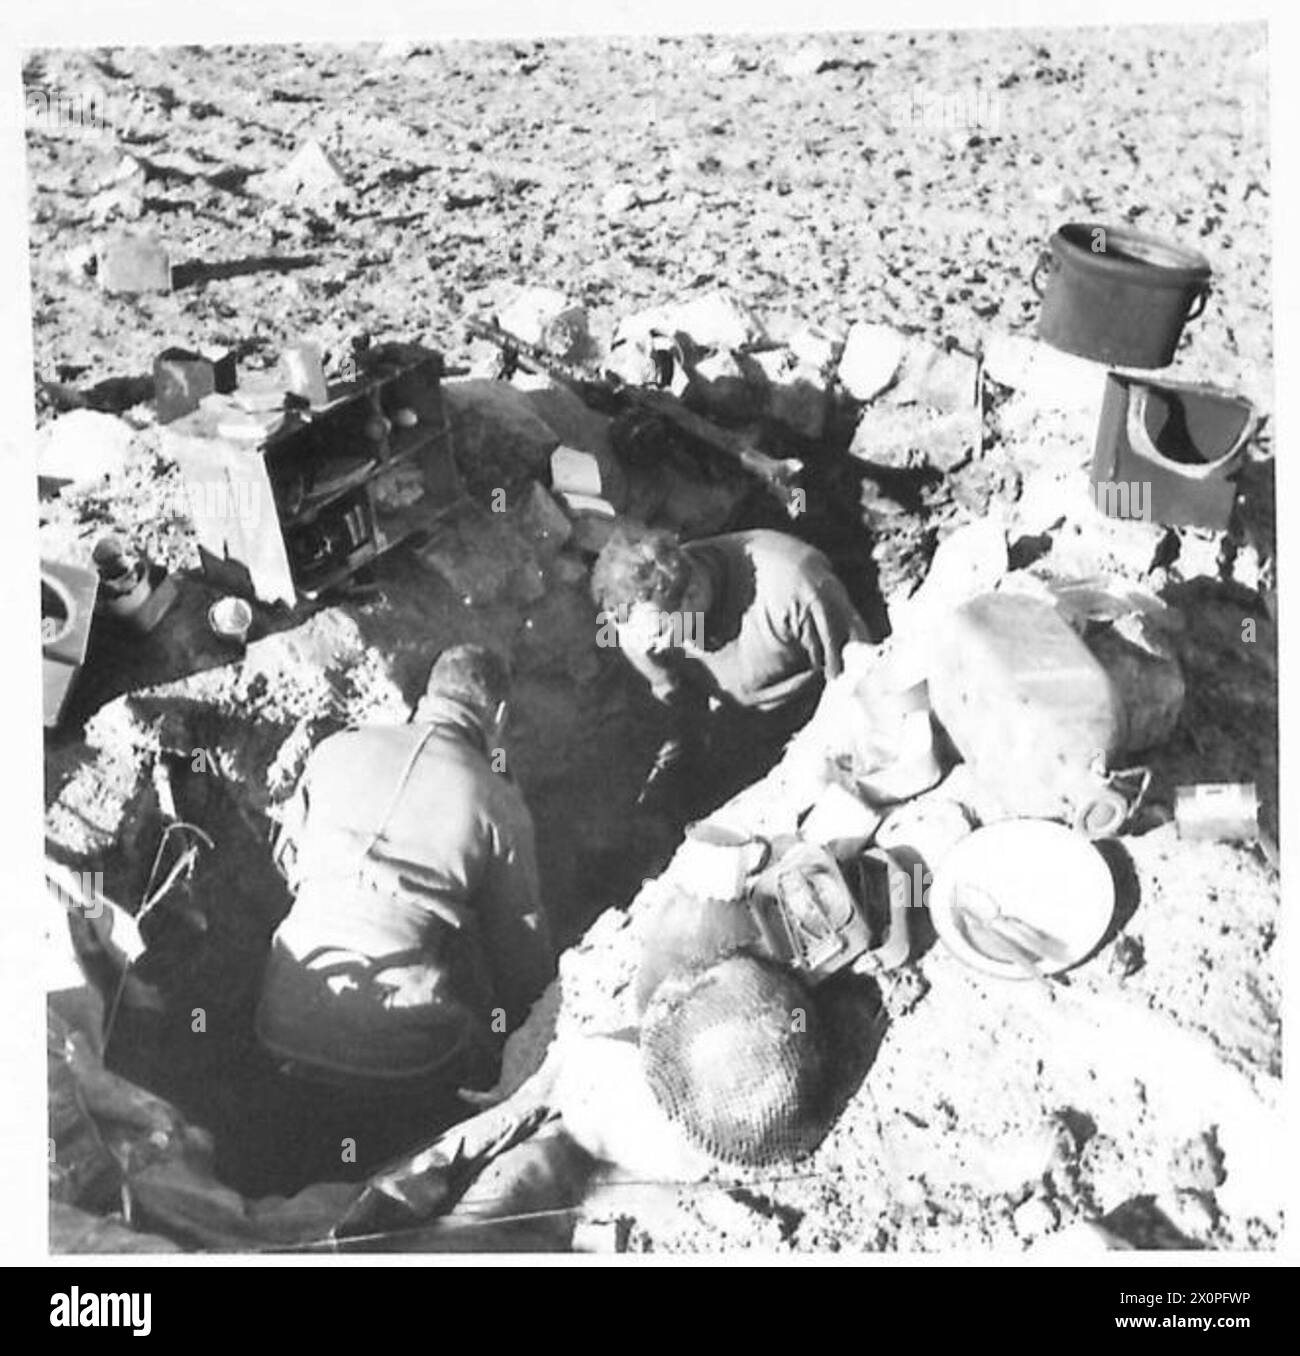 THE BRITISH ARMY IN THE TUNISIA CAMPAIGN, NOVEMBER 1942-MAY 1943 - Sergeant Walker and Fusilier Bridge of a two-pounder anti-tank section of the 2nd Battalion, Lancashire Fusiliers (11th Infantry Brigade, 78th Division) in a slit trench, probably near Sidi Nsir, 2 January 1943. Note a German MG 34 machine gun, captured by the troops during a patrol.Sergeant Walker was a resident of Salford and Fusilier Bridge of Baildon in civilian life British Army, British Army, 1st Army, British Army, 78th Infantry Division, British Army, Lancashire Fusiliers, British Army, Lancashire Fusiliers, Bn, 2 Stock Photo